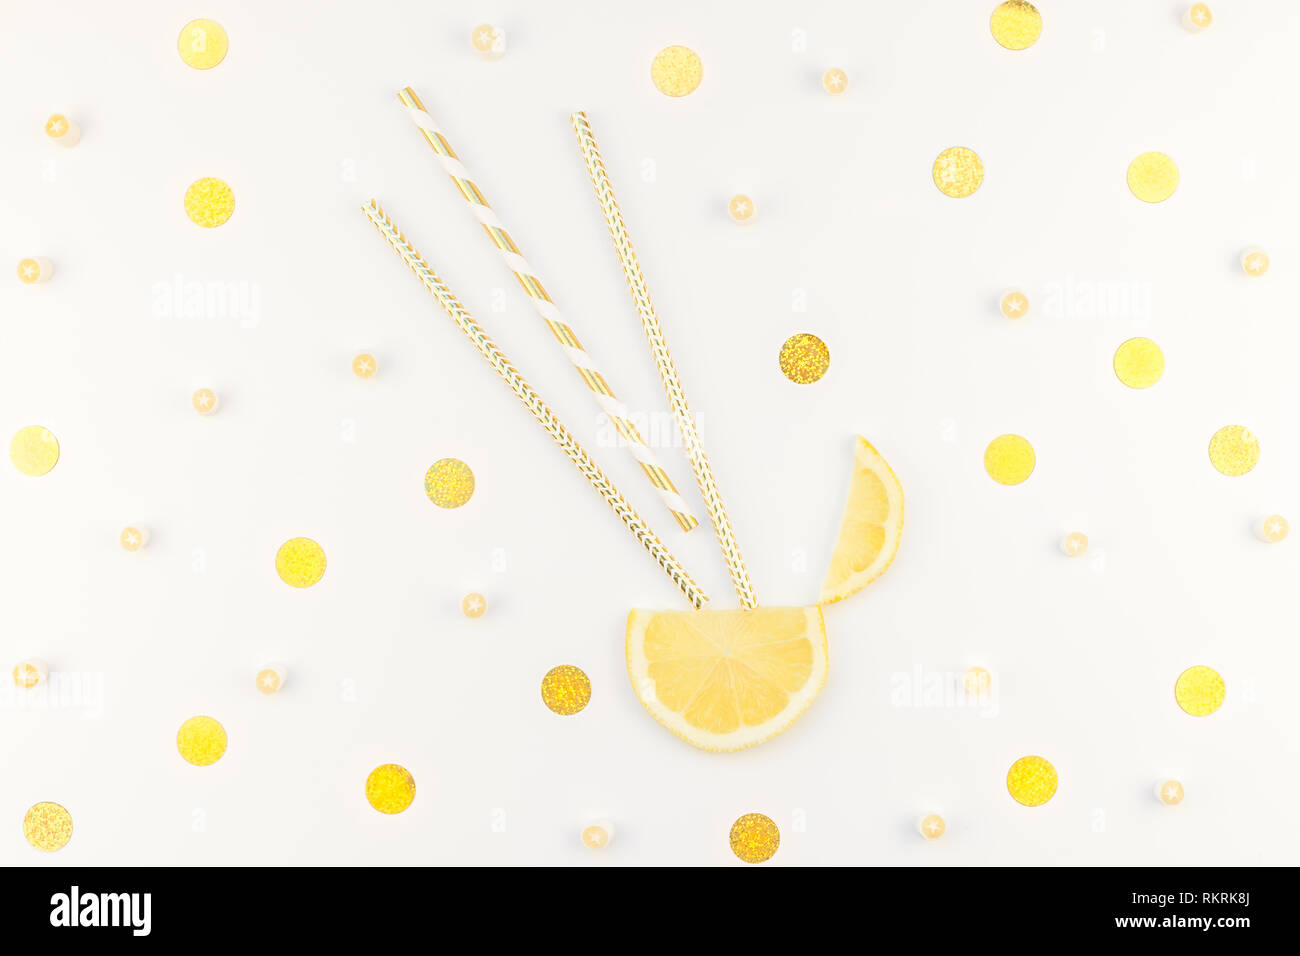 Creative flatlay overhead top view citrus lemon slices and candies white table background with copyspace. Hot summer refreshment lemonade concept. Bev Stock Photo